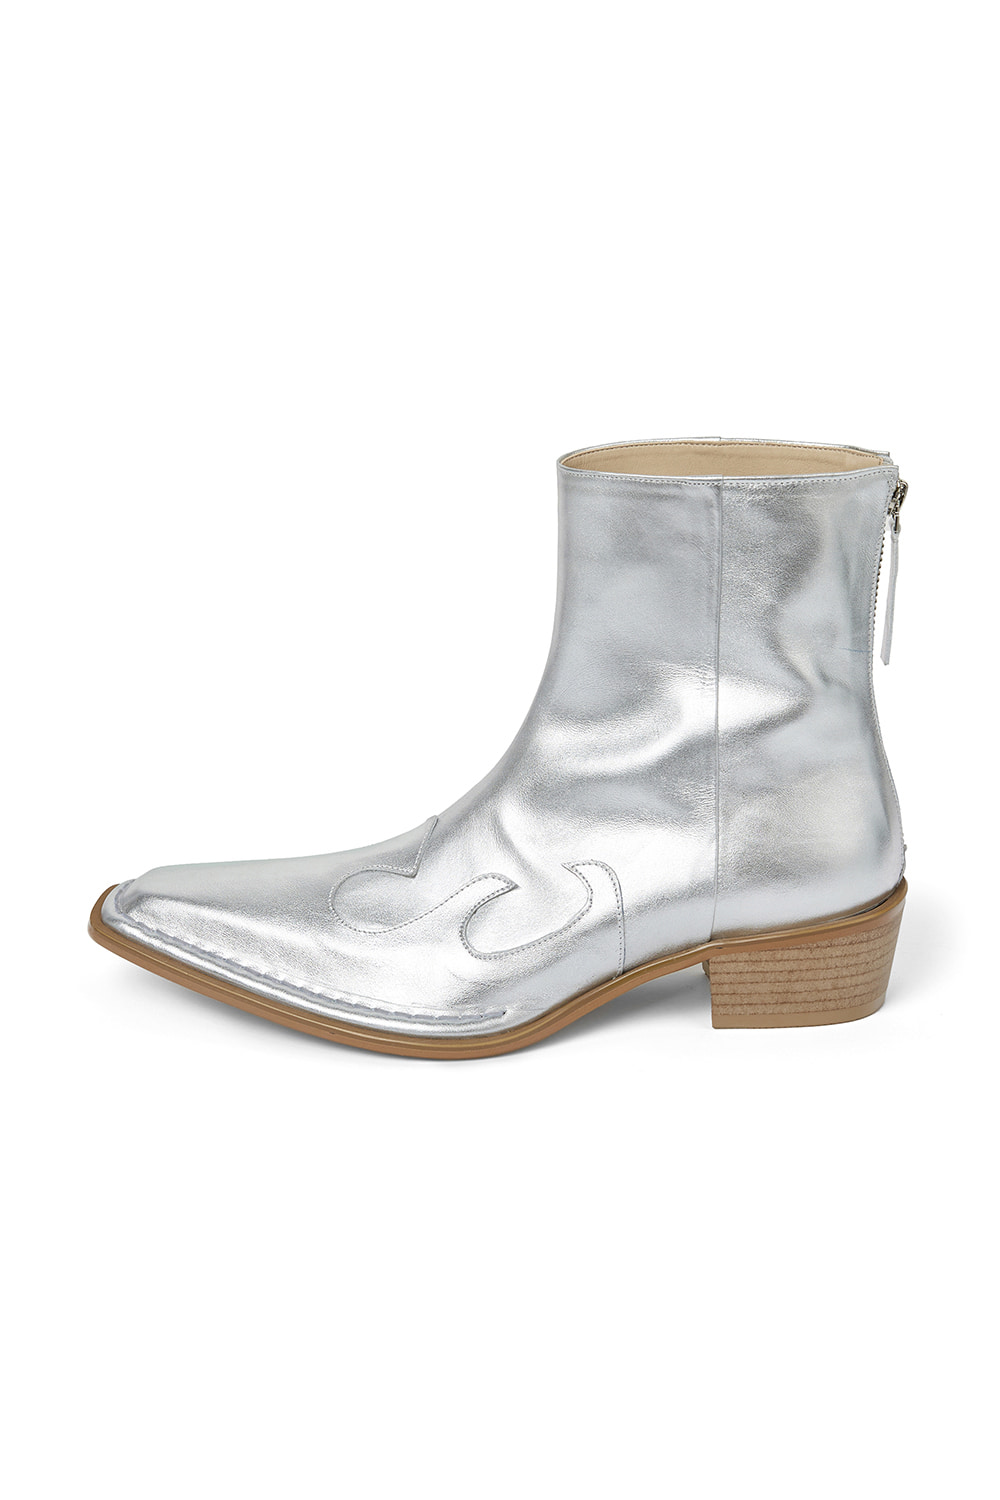 WESTERN ANKLE BOOTS [SILVER]		